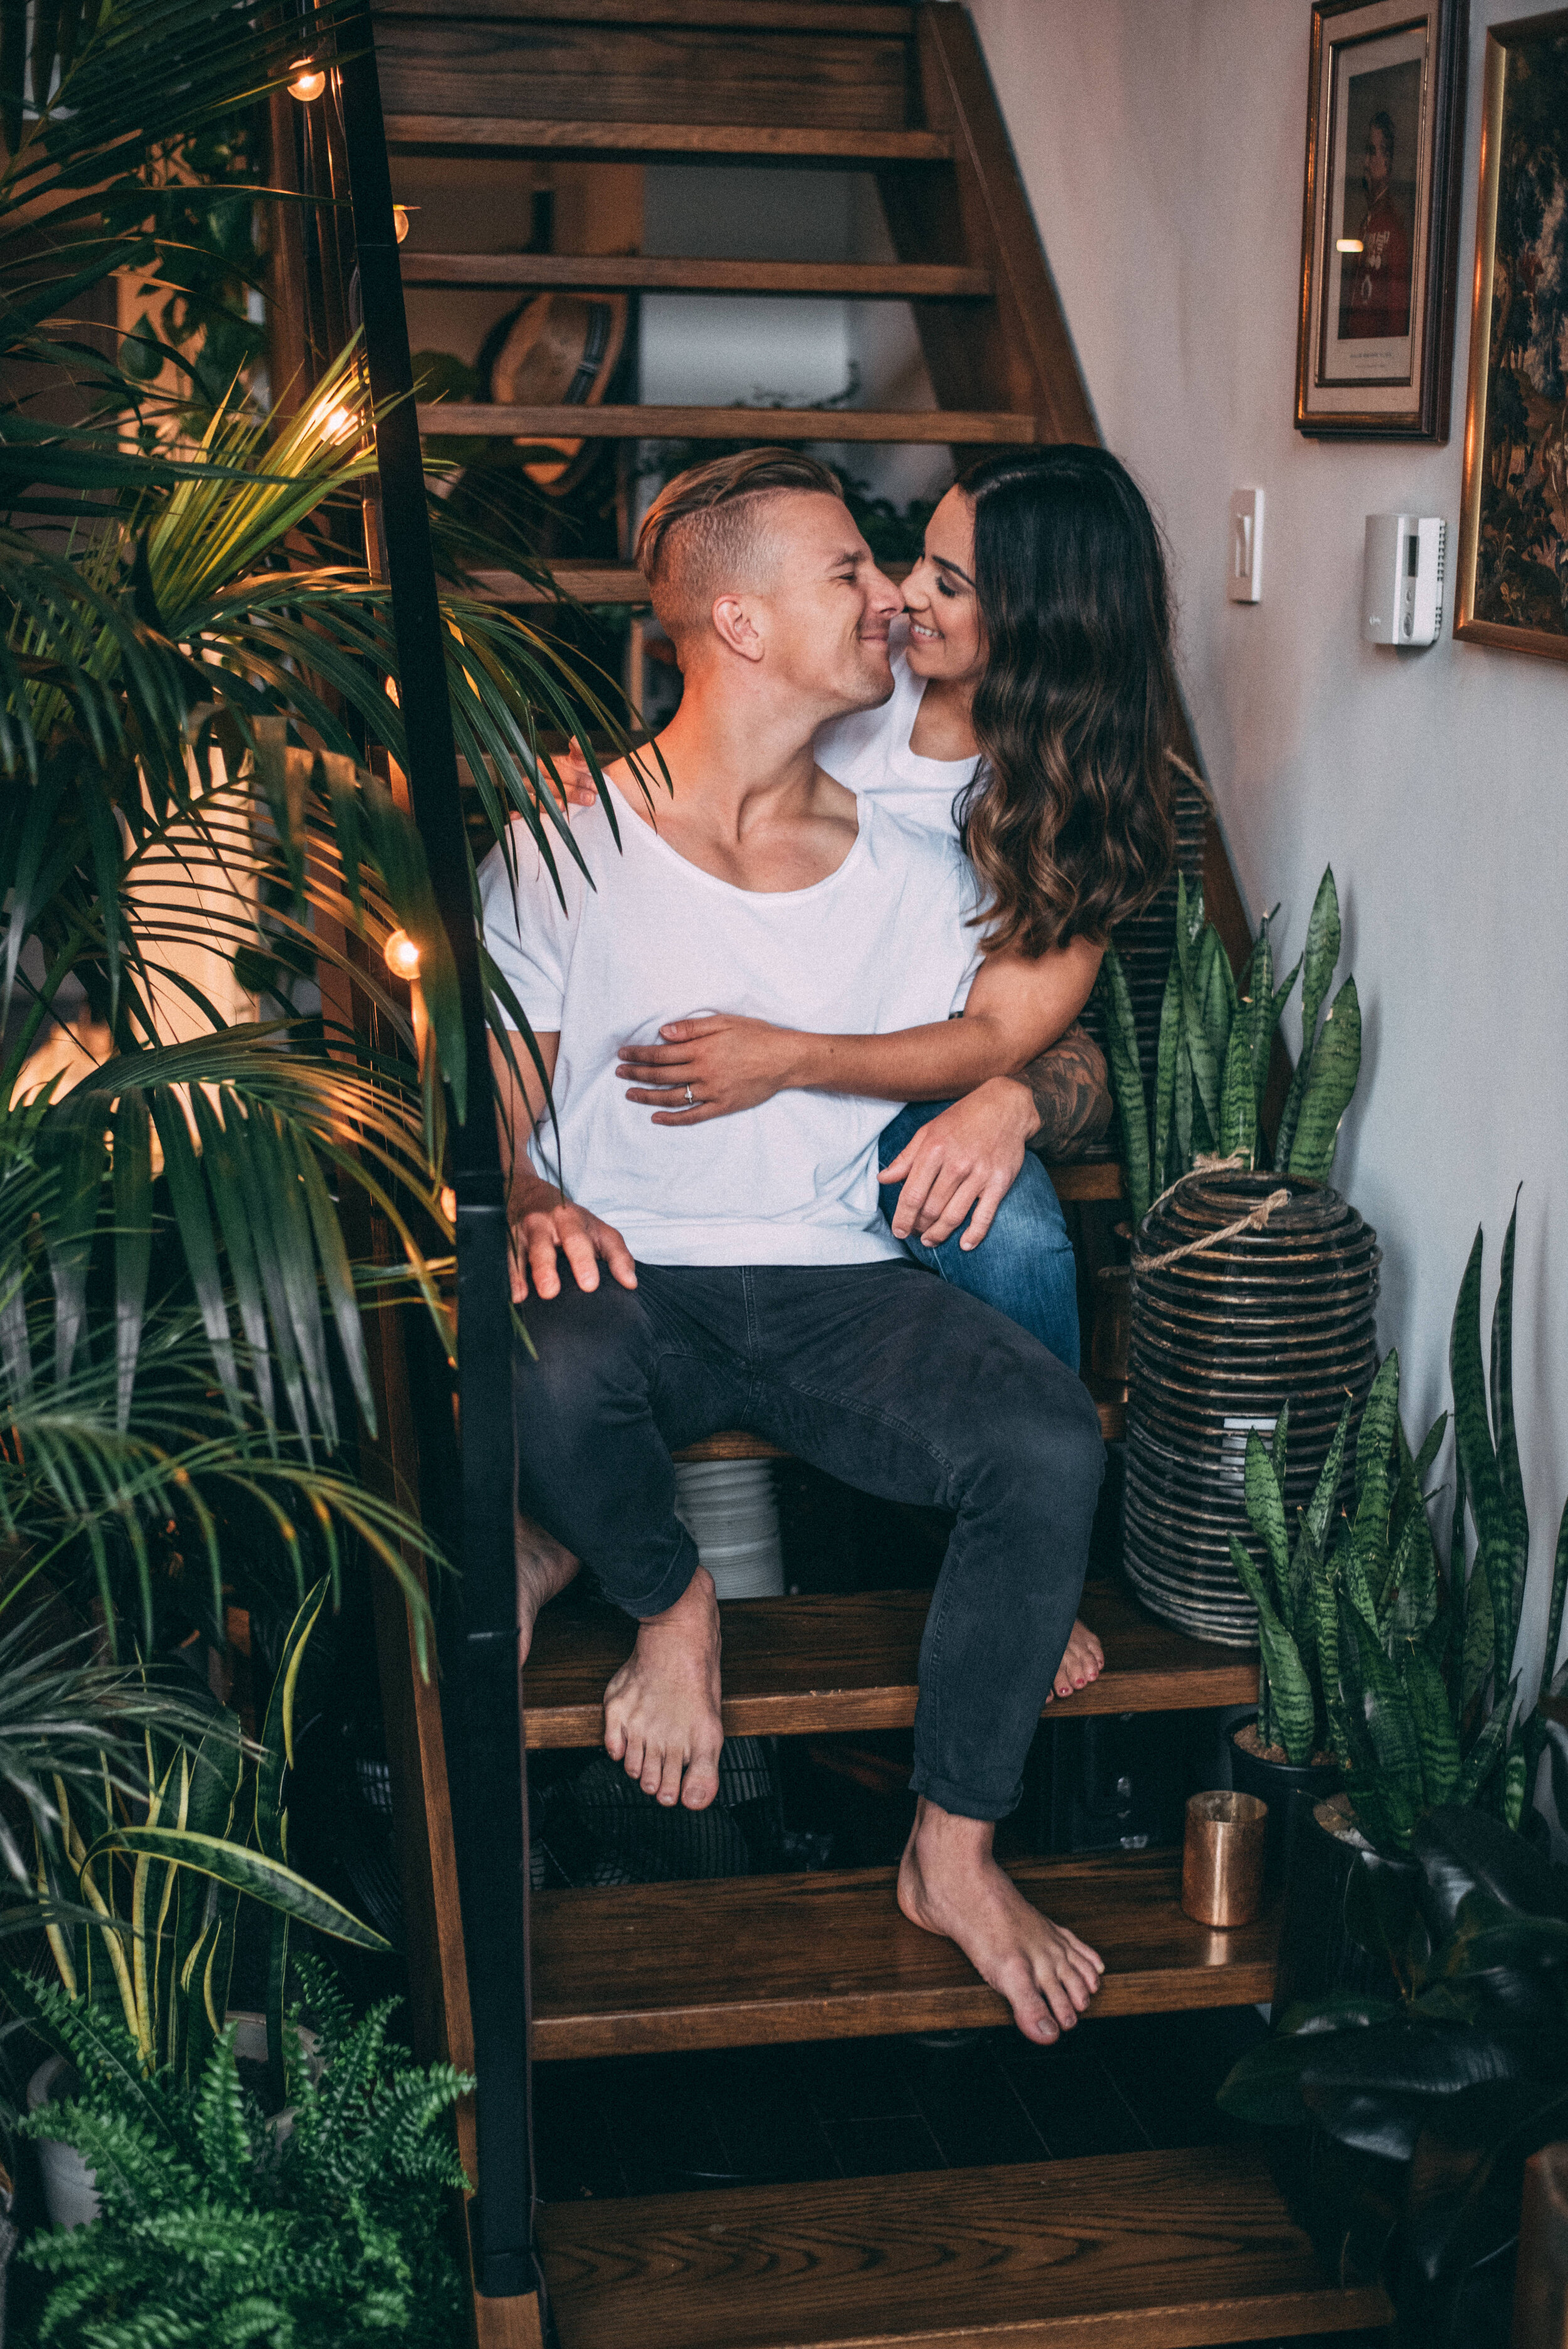 Vancouver Engagement Session - In Home Couples Session - Loft Garden Oasis - Laura Olson Photography - Sunshine Coast BC & Vancouver Wedding & Elopement Photographer3704.jpg